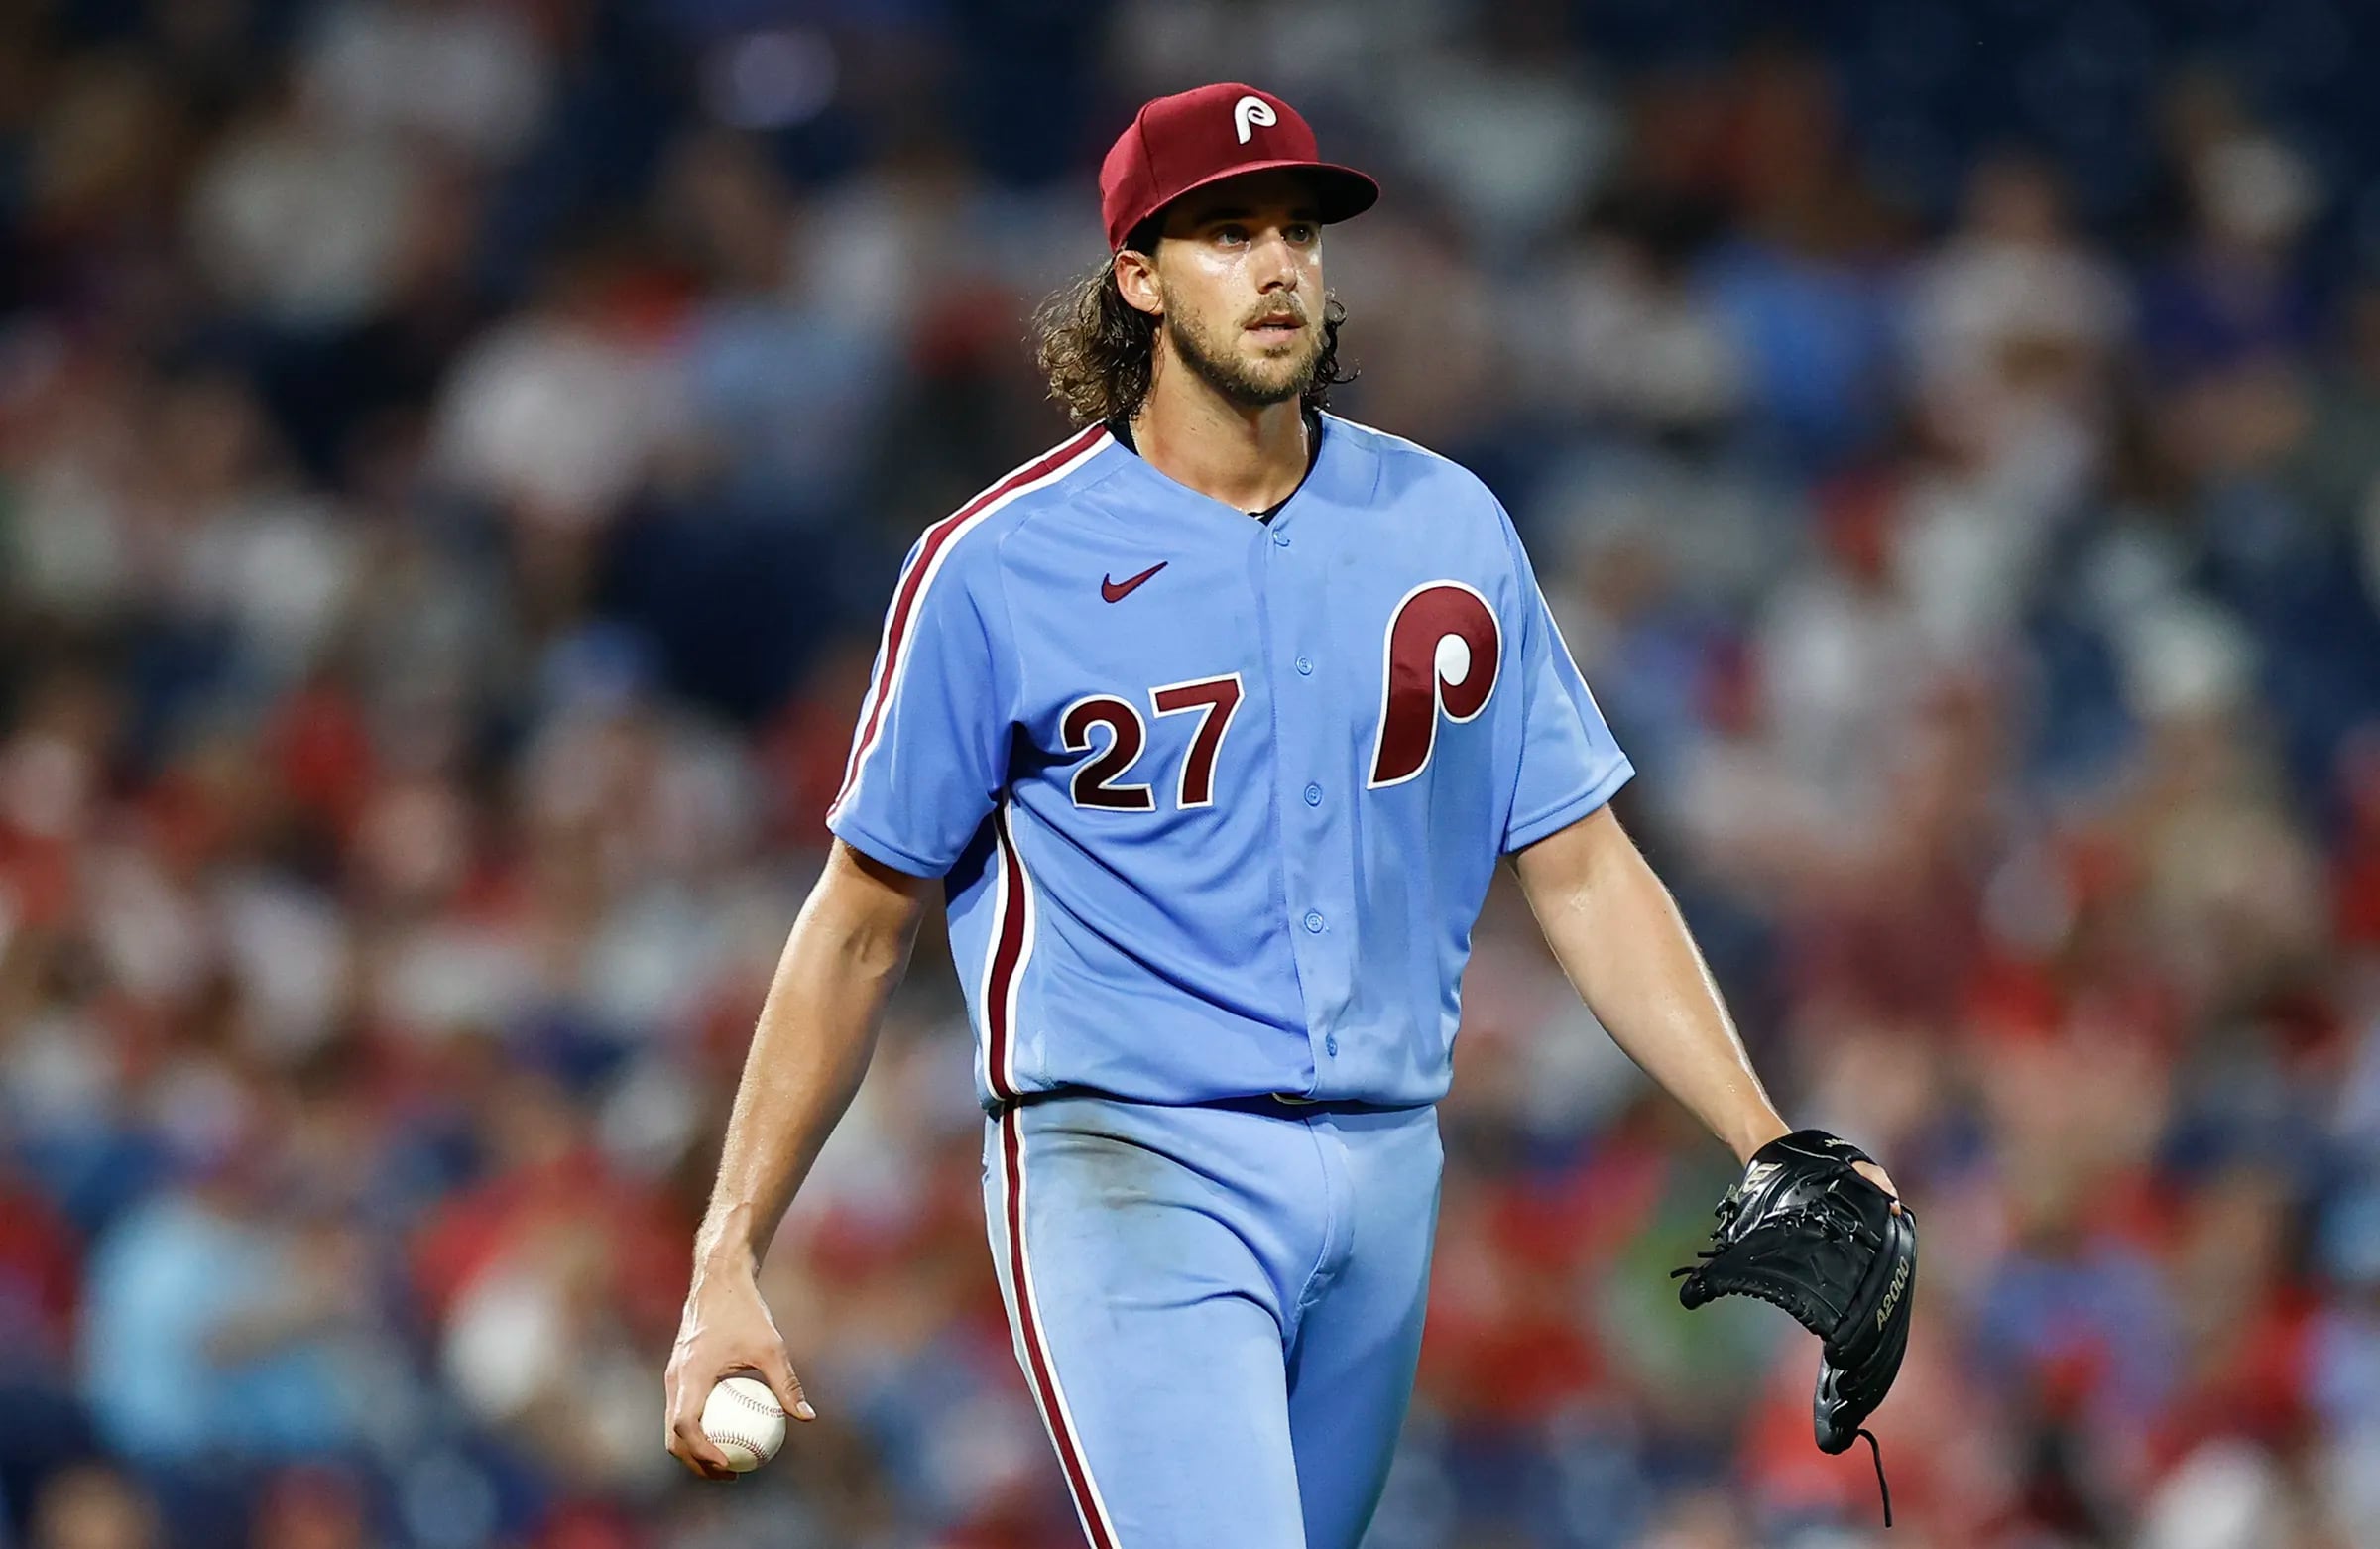 Aaron Nola's season has shades of Cole Hamels in 2009. Will the